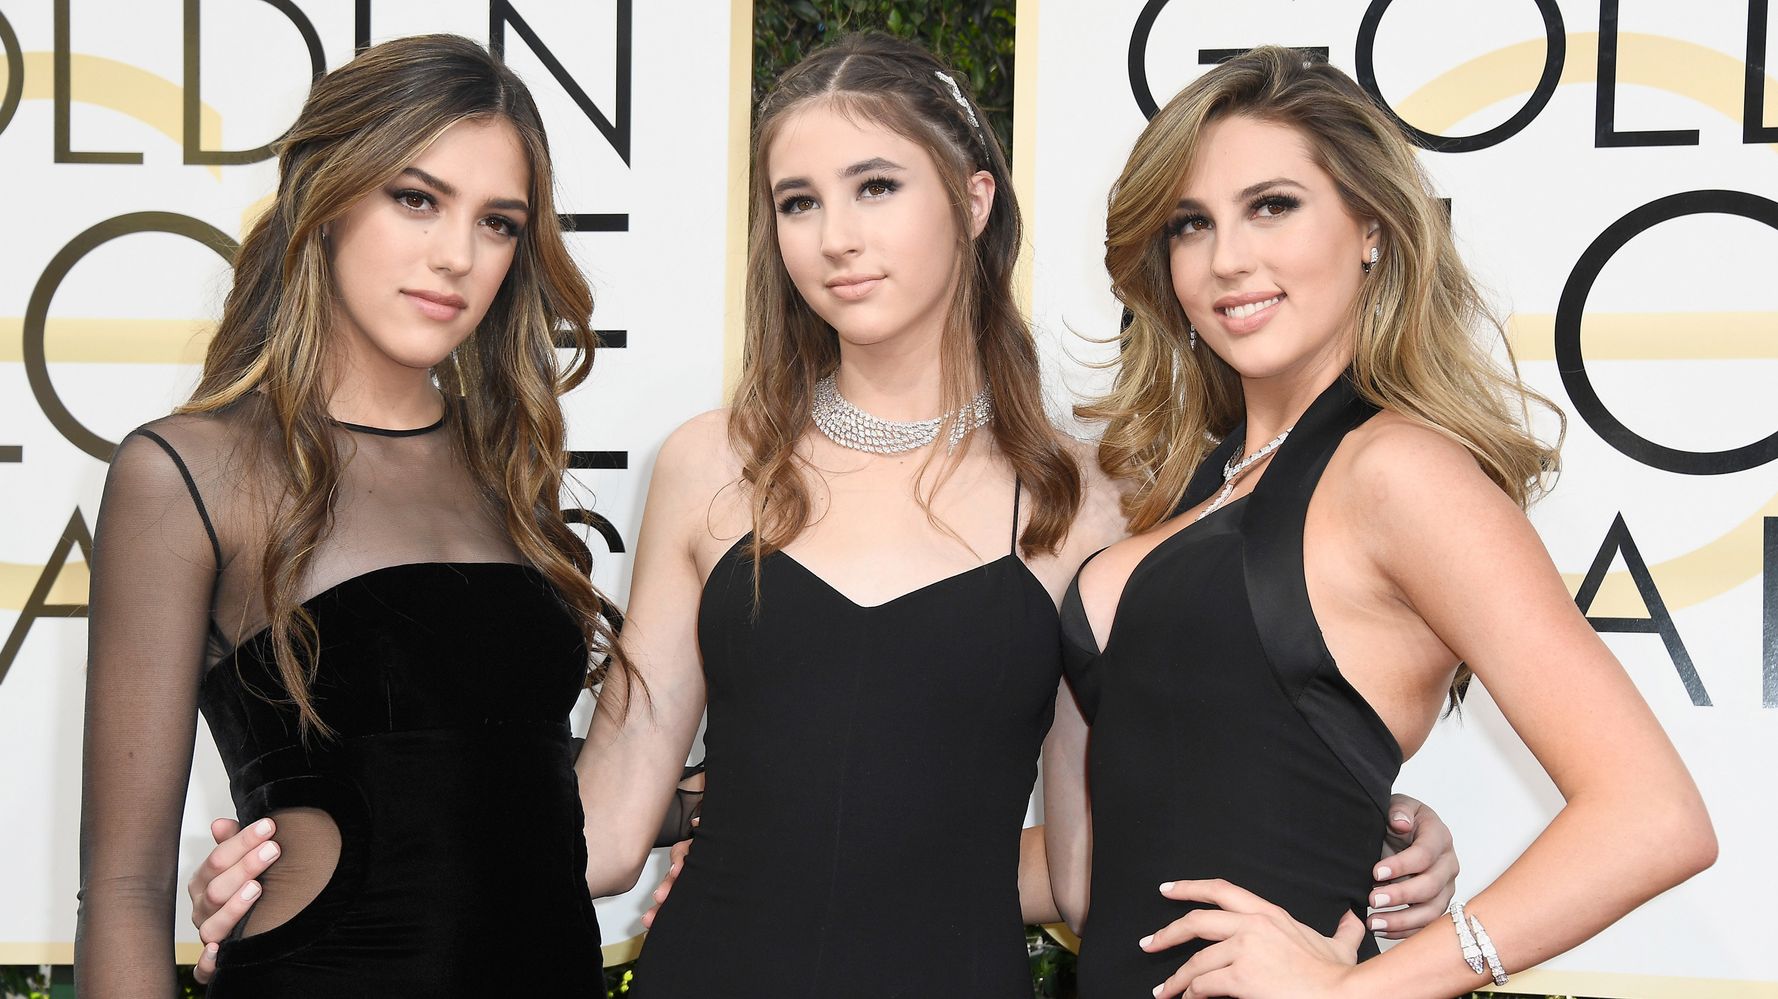 Sylvester Stallone's daughters: Sistine, Sophia and Scarlet in pictures